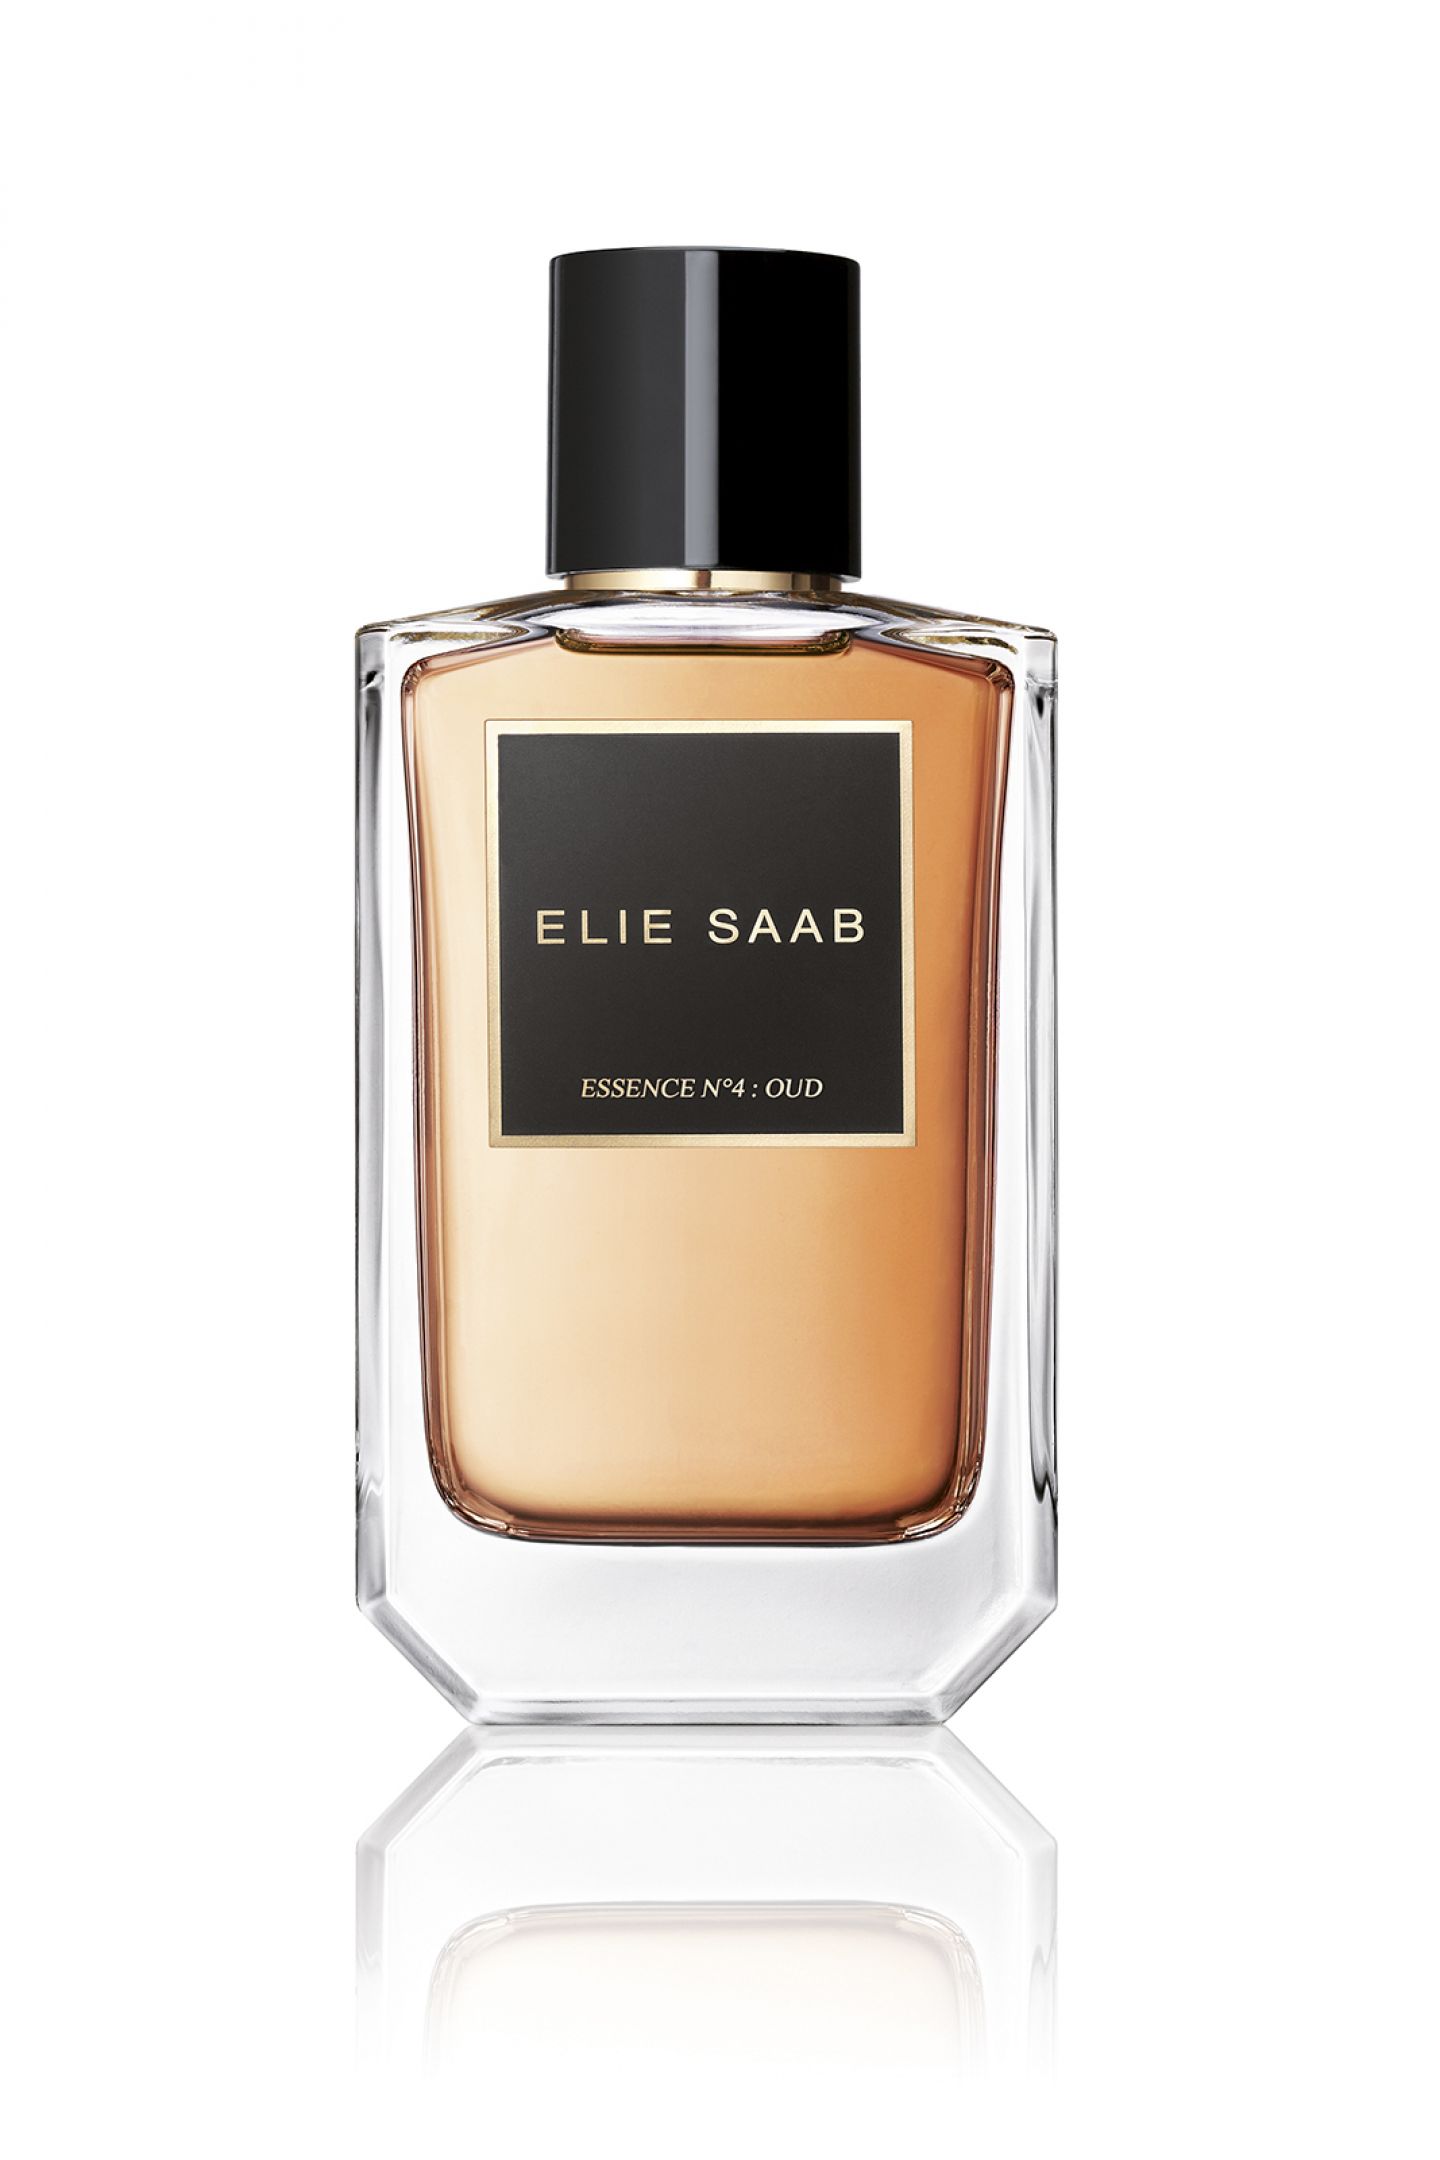 Essence No. 4 Oud Elie Saab perfume - a new fragrance for women and men ...